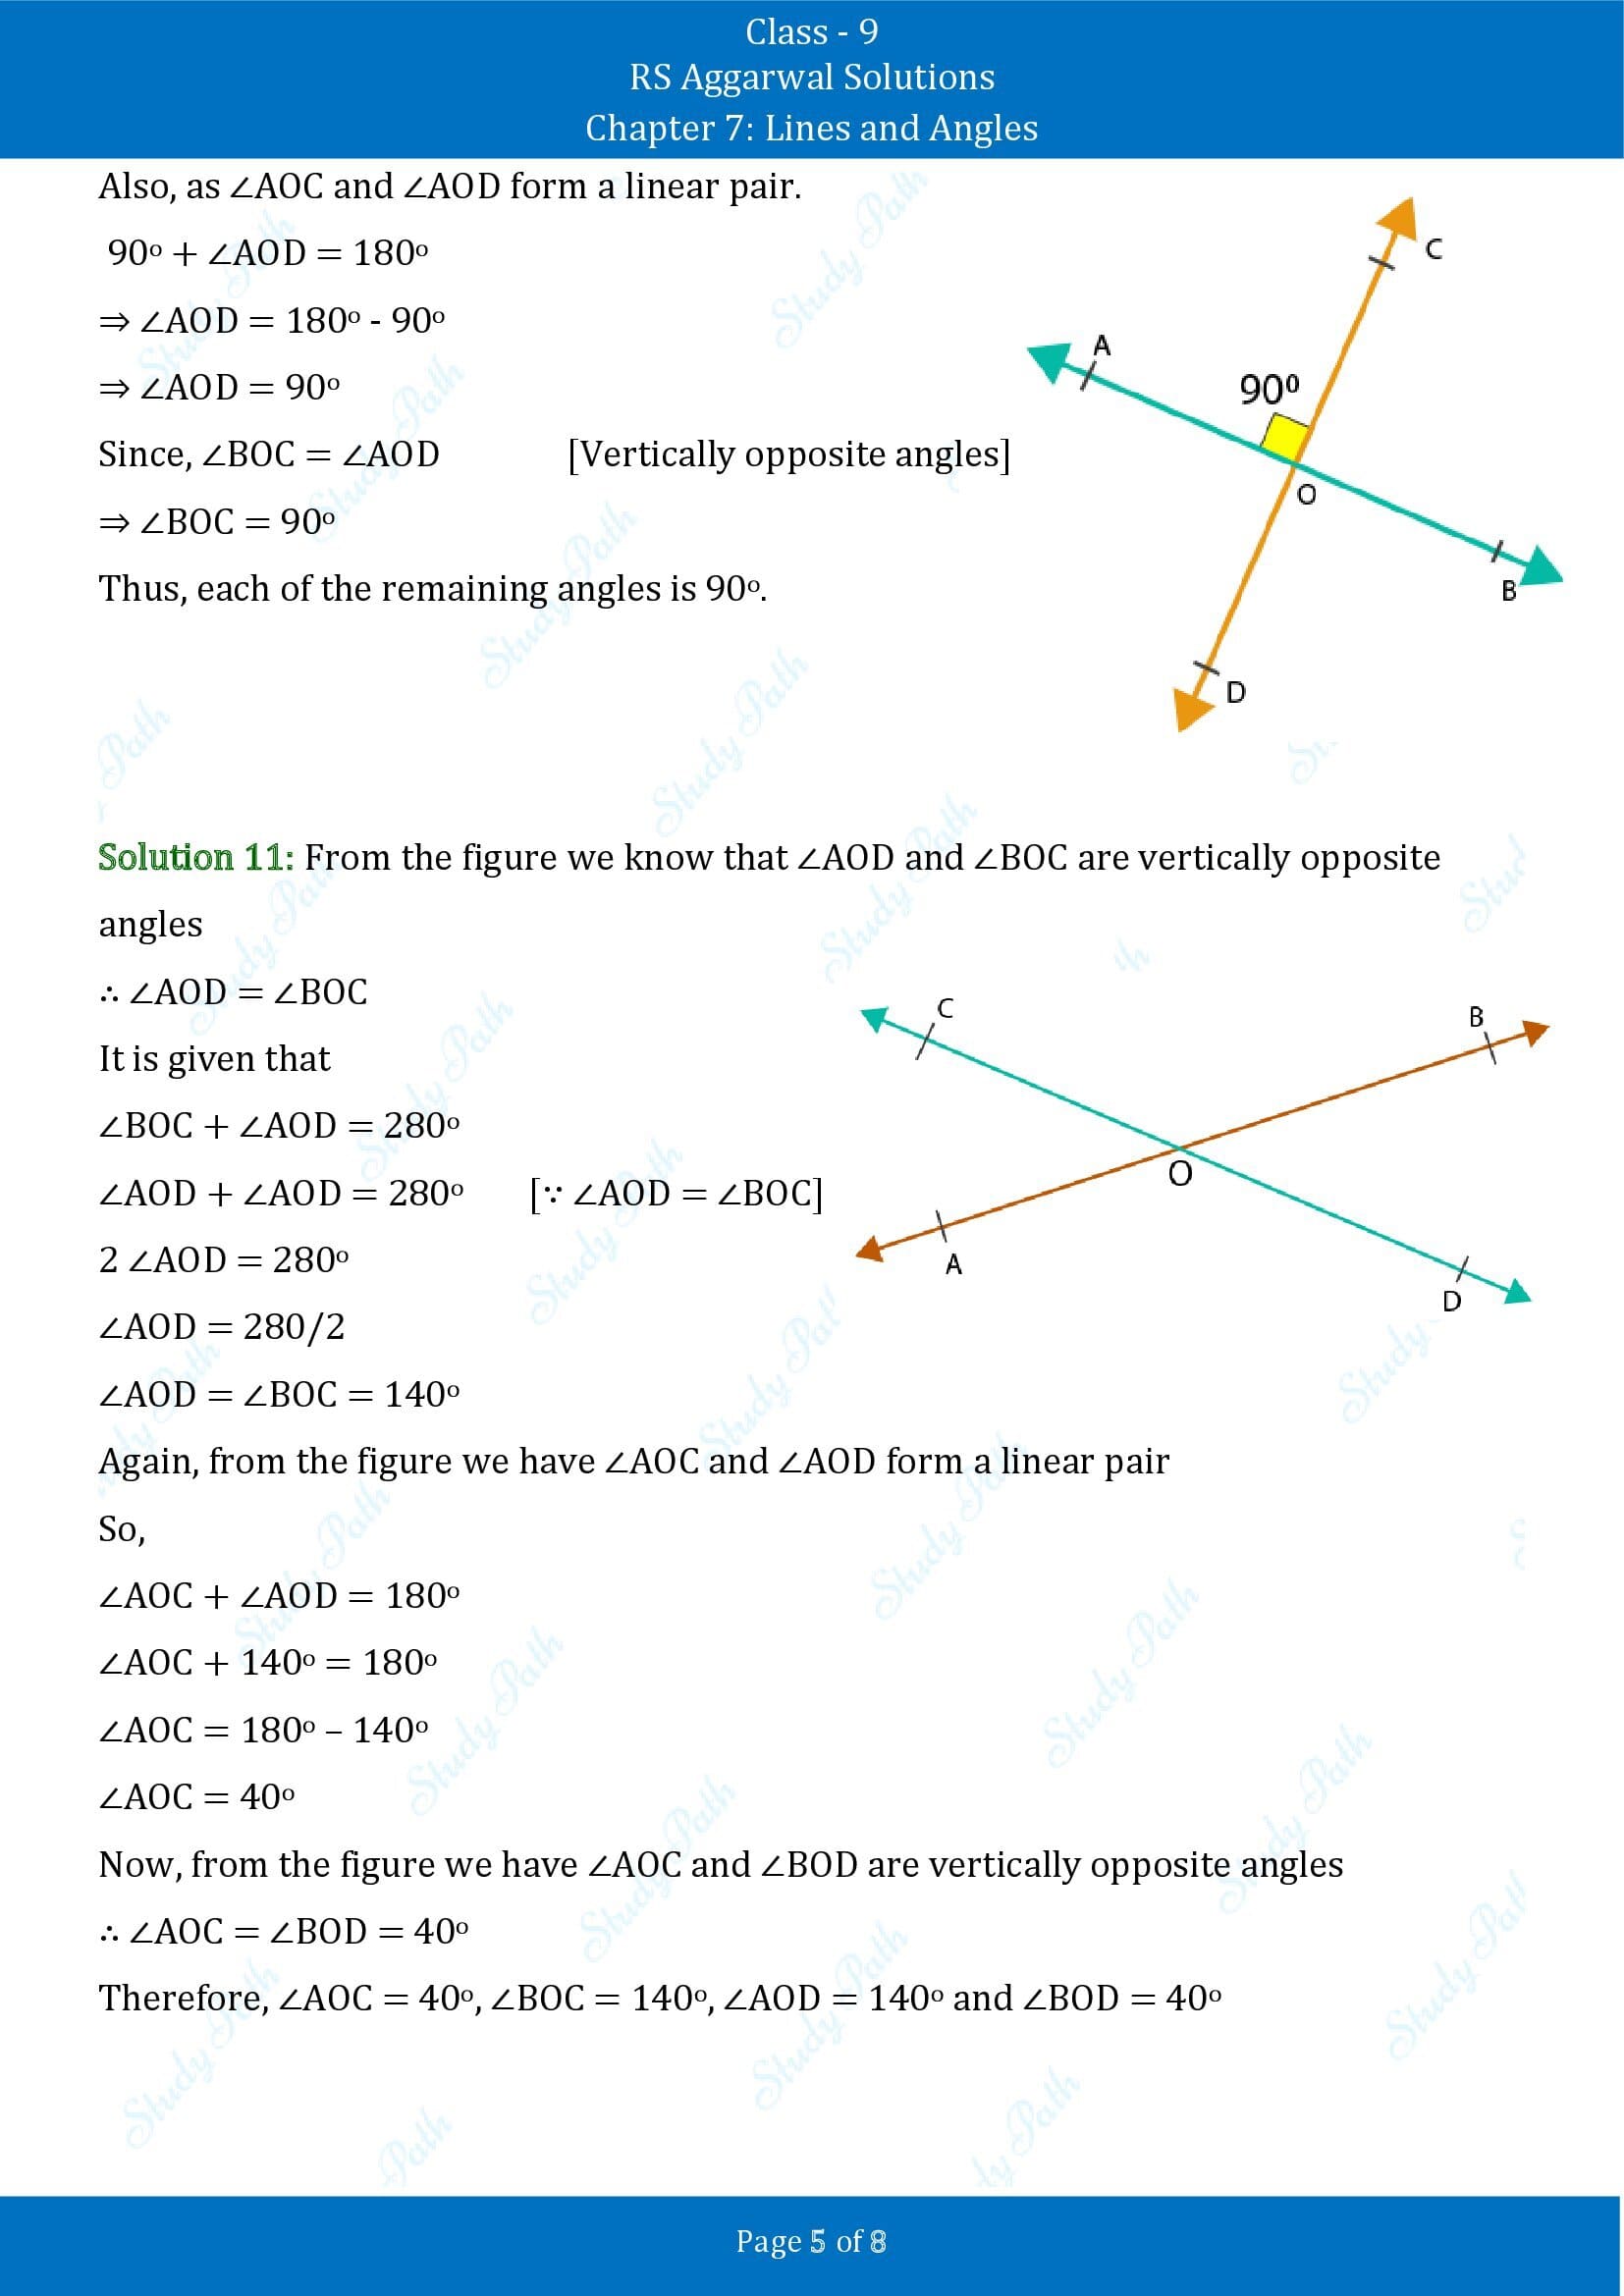 RS Aggarwal Solutions Class 9 Chapter 7 Lines and Angles Exercise 7B 00005